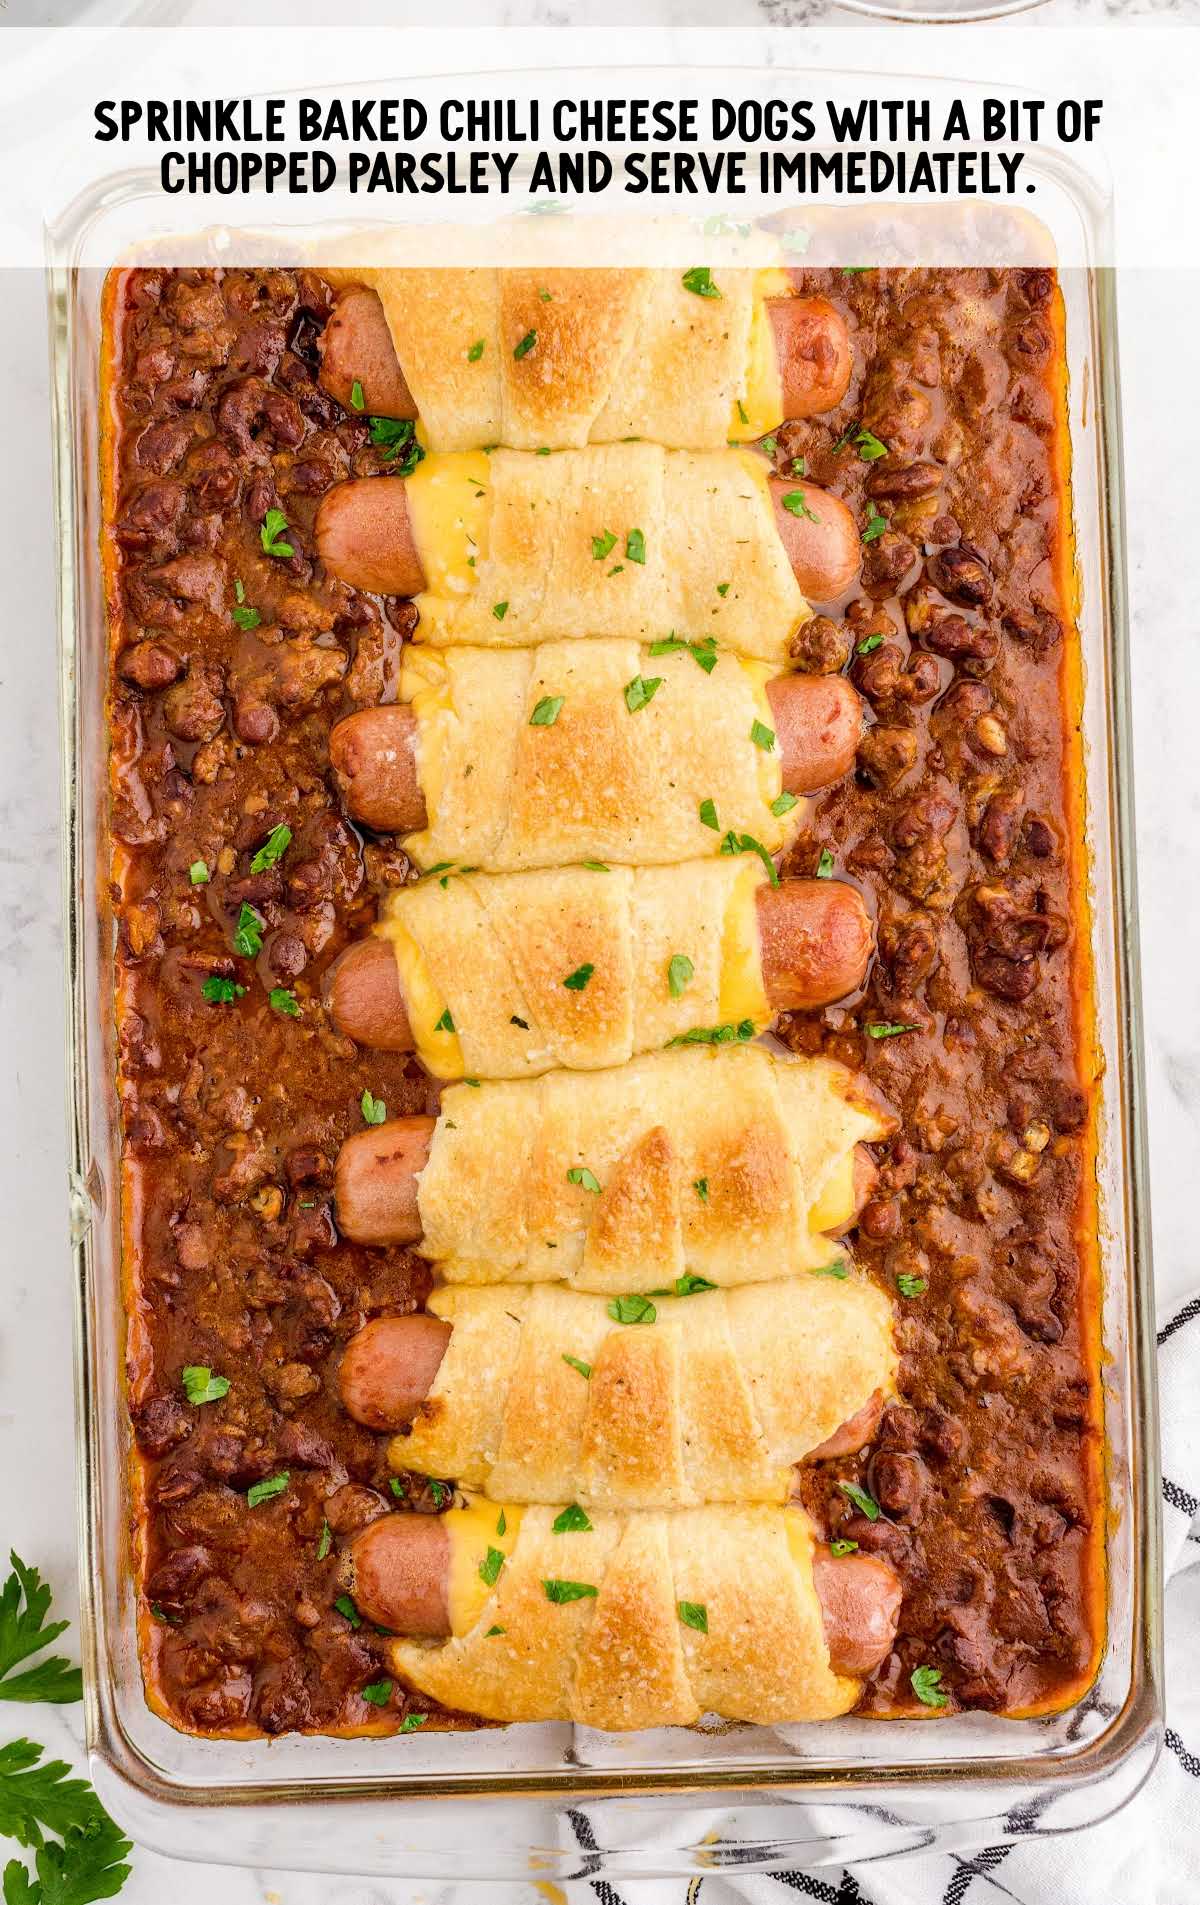 chili cheese dog bake sprinkled with parsley in a baking dish